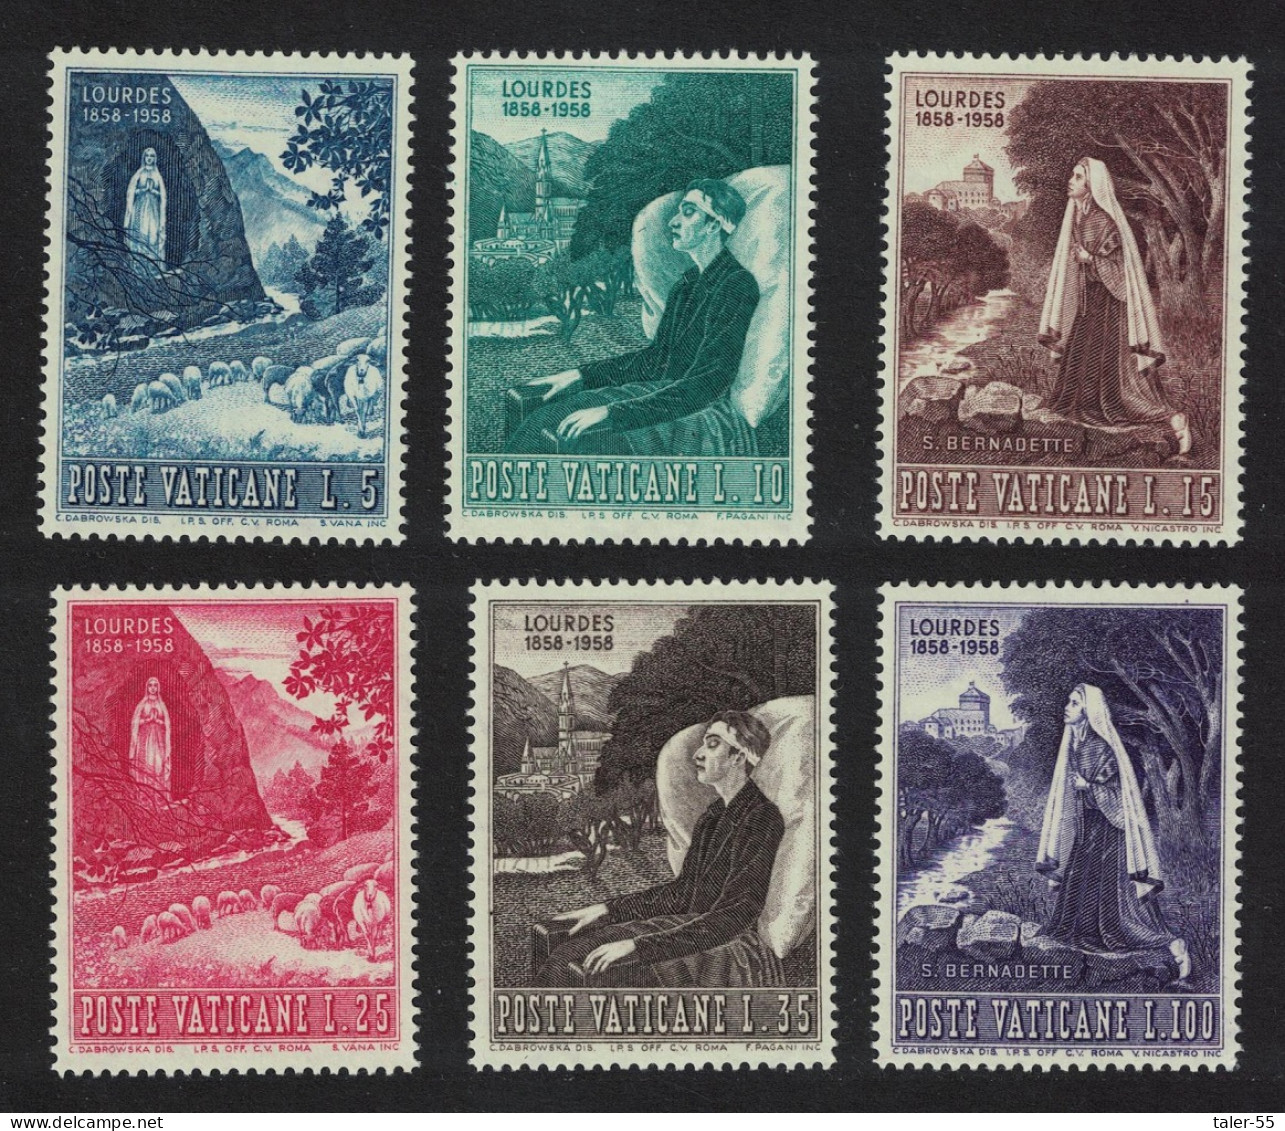 Vatican Apparition Of The Virgin Mary At Lourdes 6v 1958 MNH SG#265-270 Sc#233-238 - Neufs